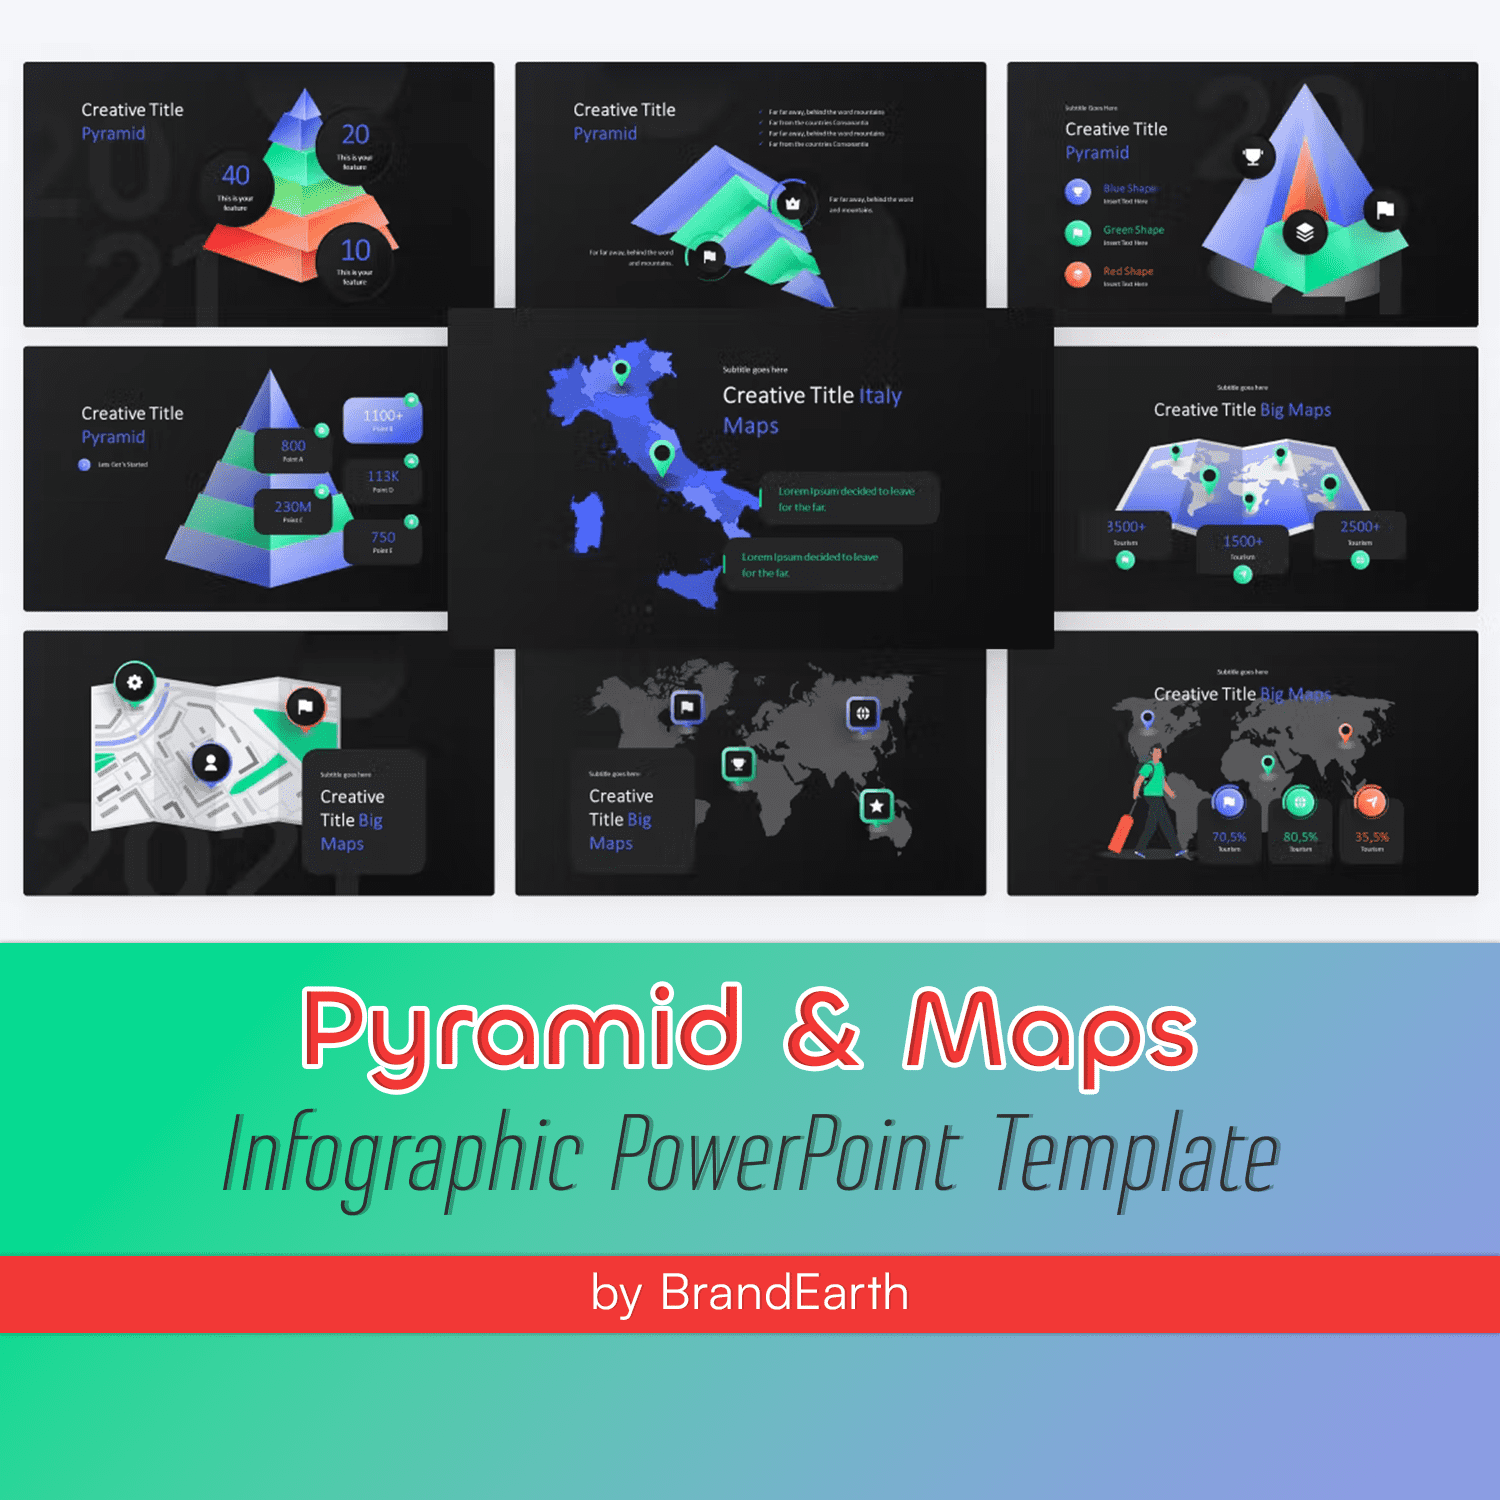 Pyramid & Maps Infographic PowerPoint Template Cover.